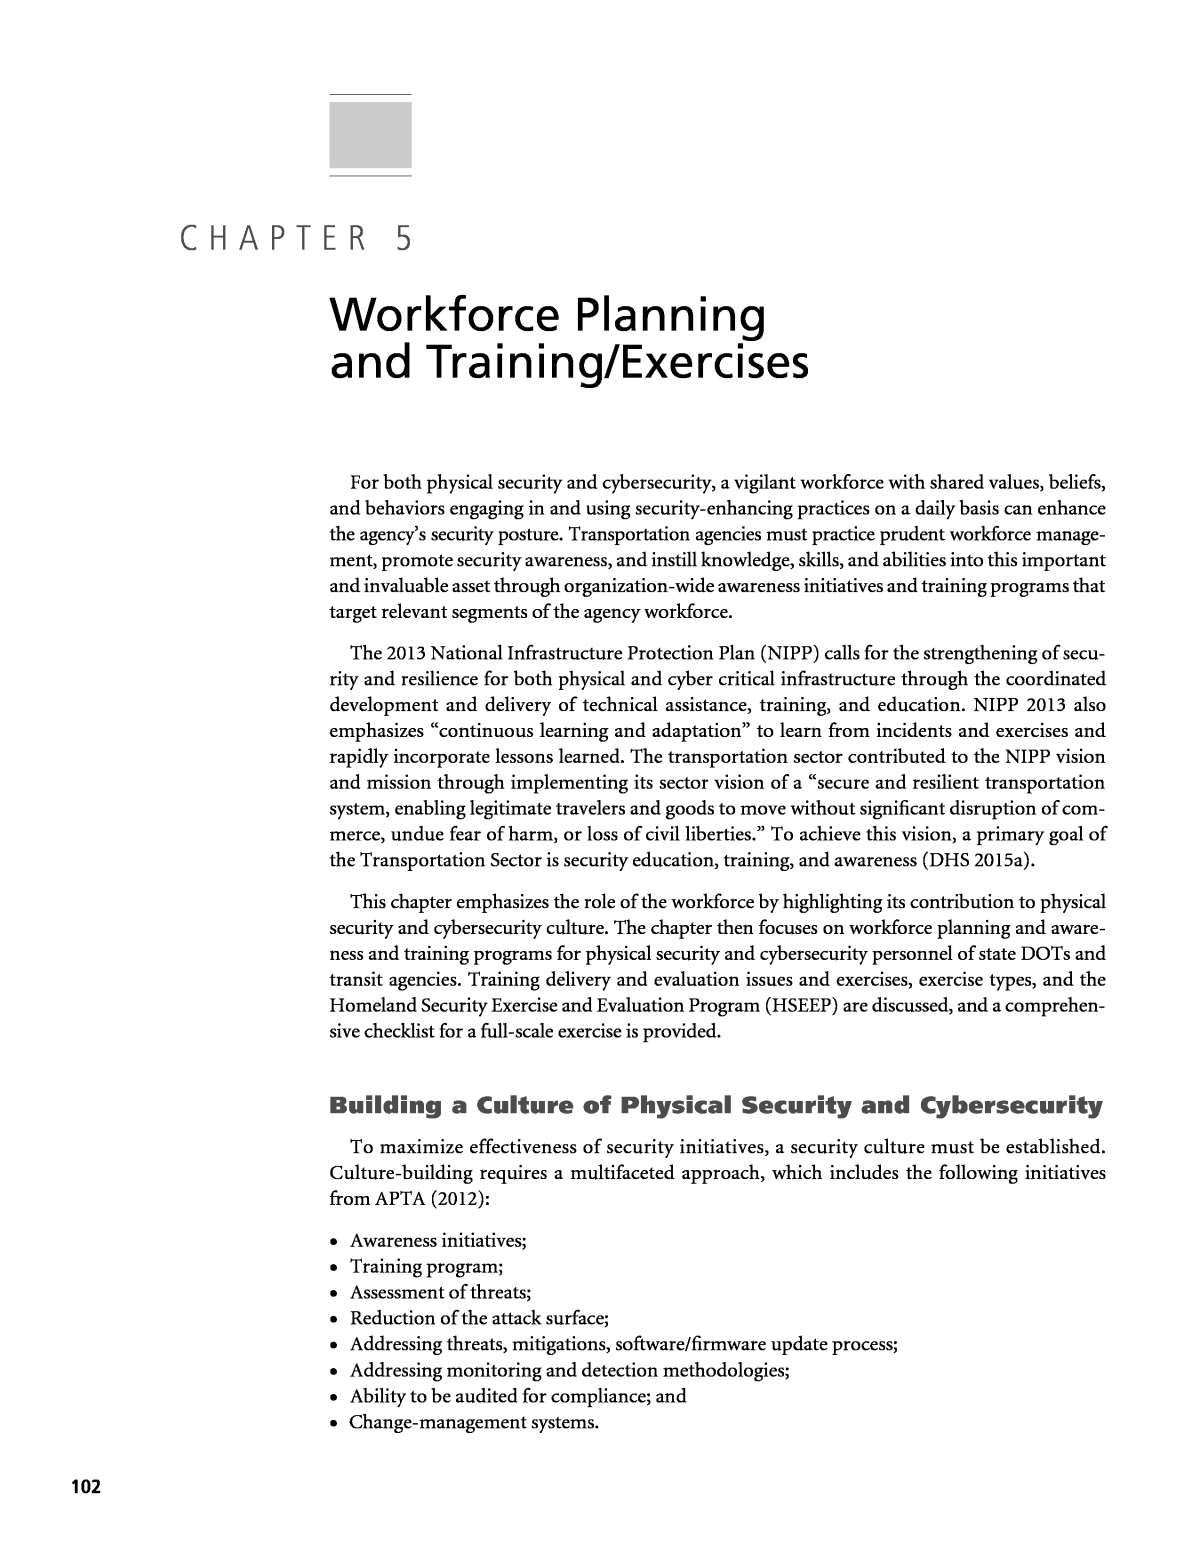 Chapter 5 - Workforce Planning and Training/Exercises, Update of Security  101: A Physical Security and Cybersecurity Primer for Transportation  Agencies